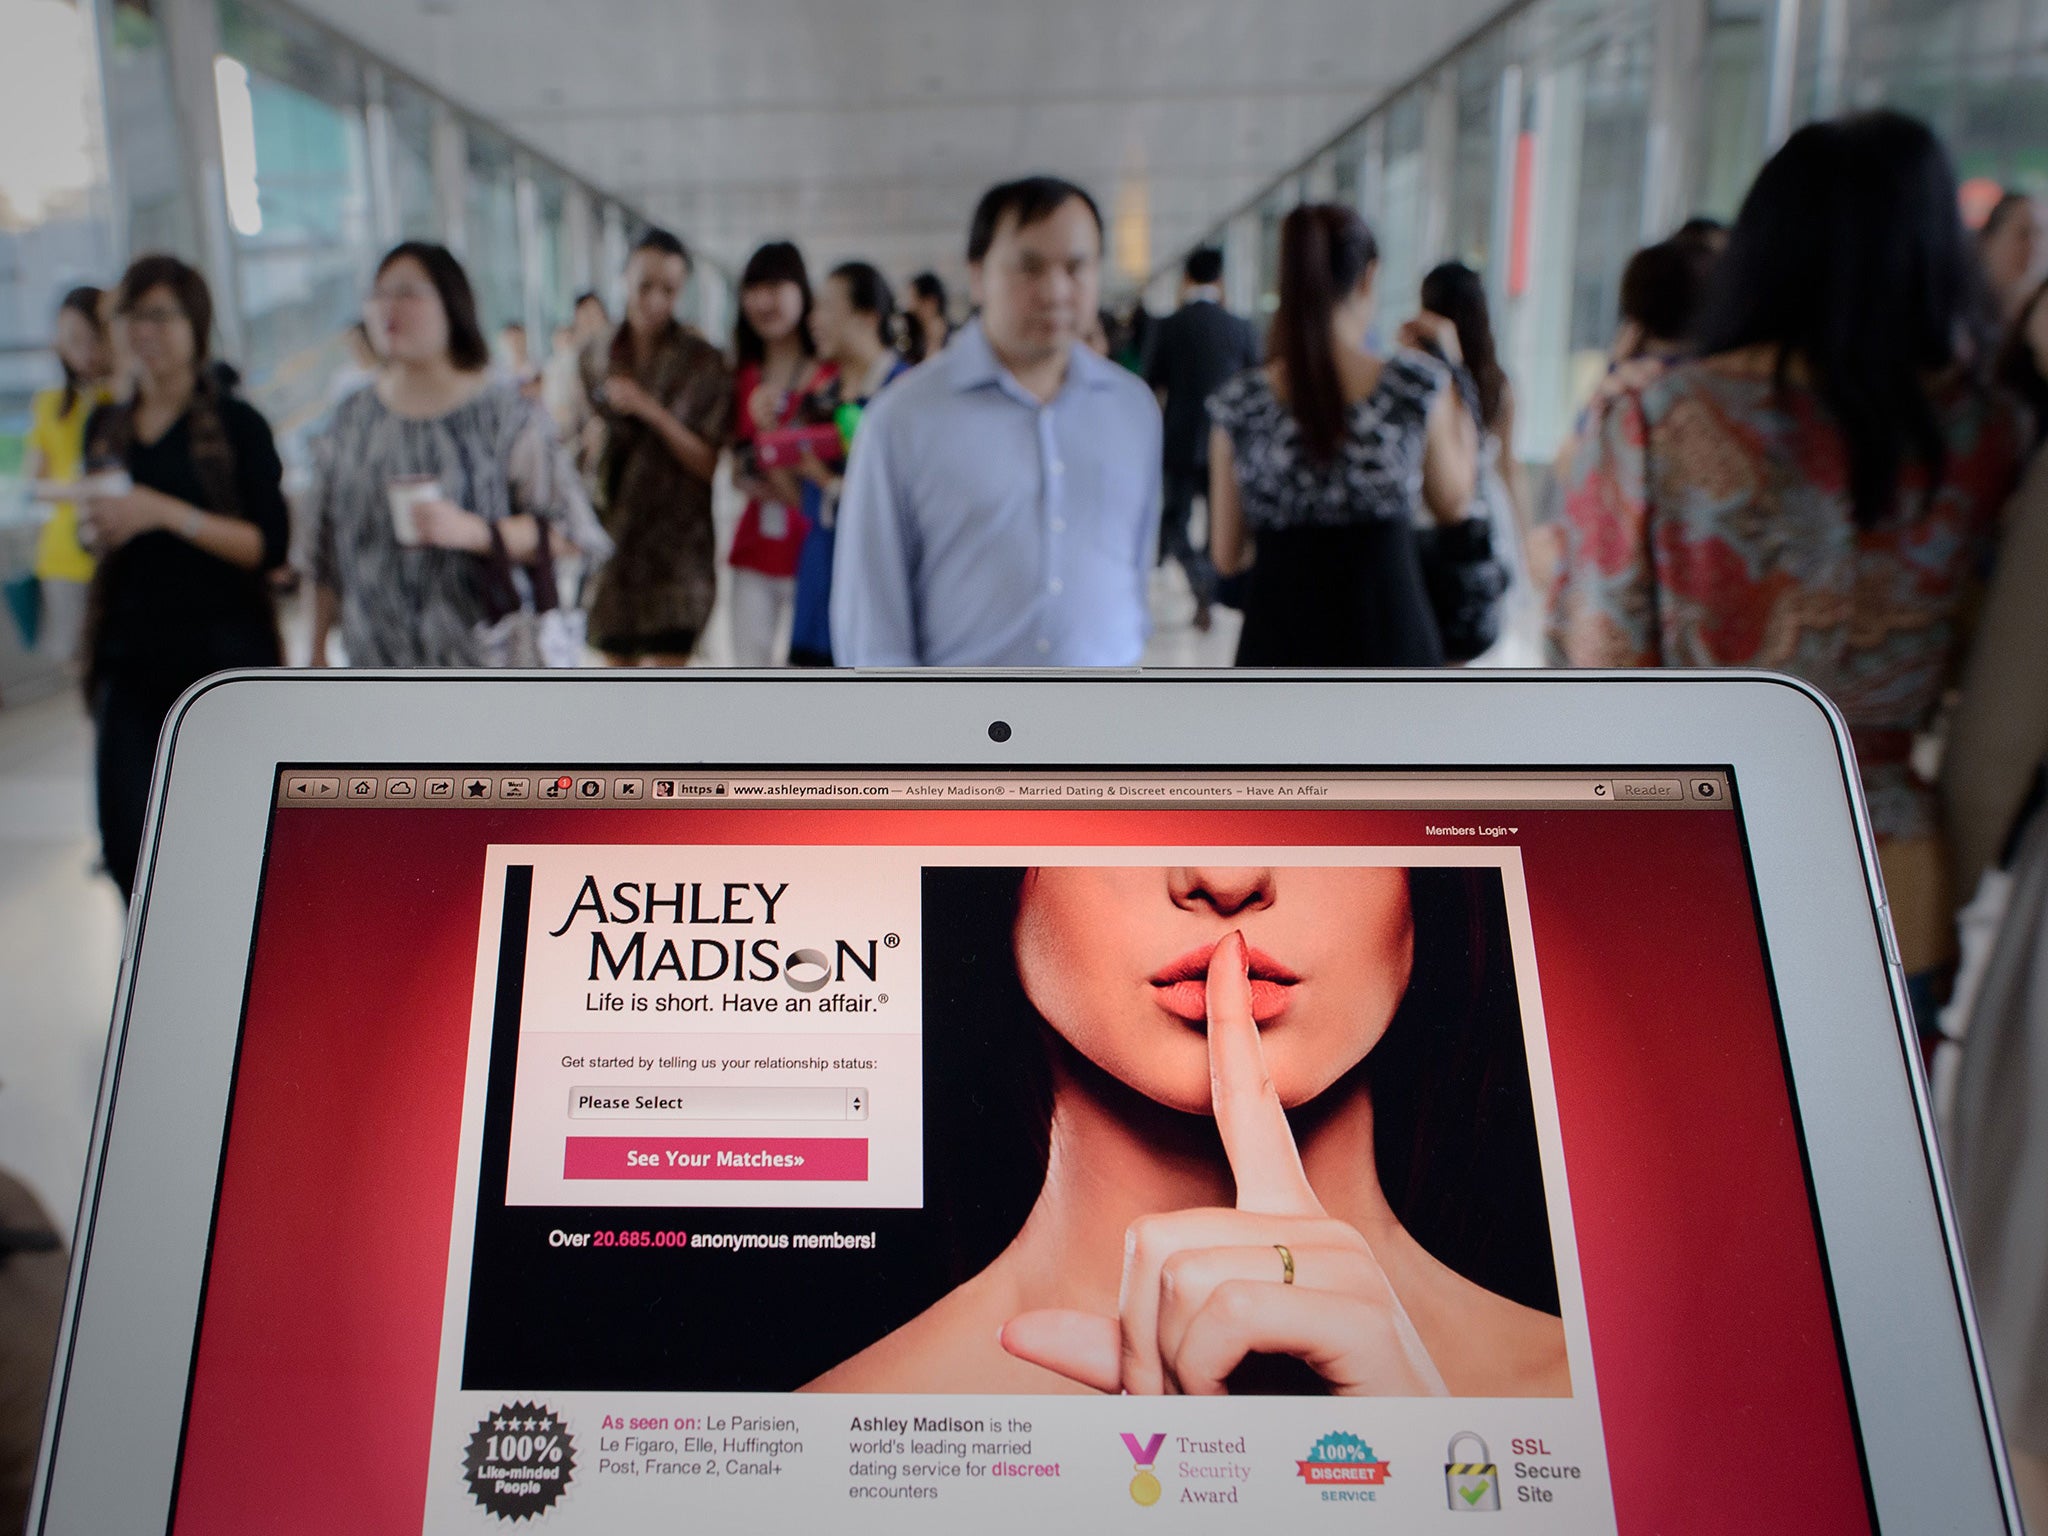 The Ashley Madison website claims around 1 in 7 of its users are female